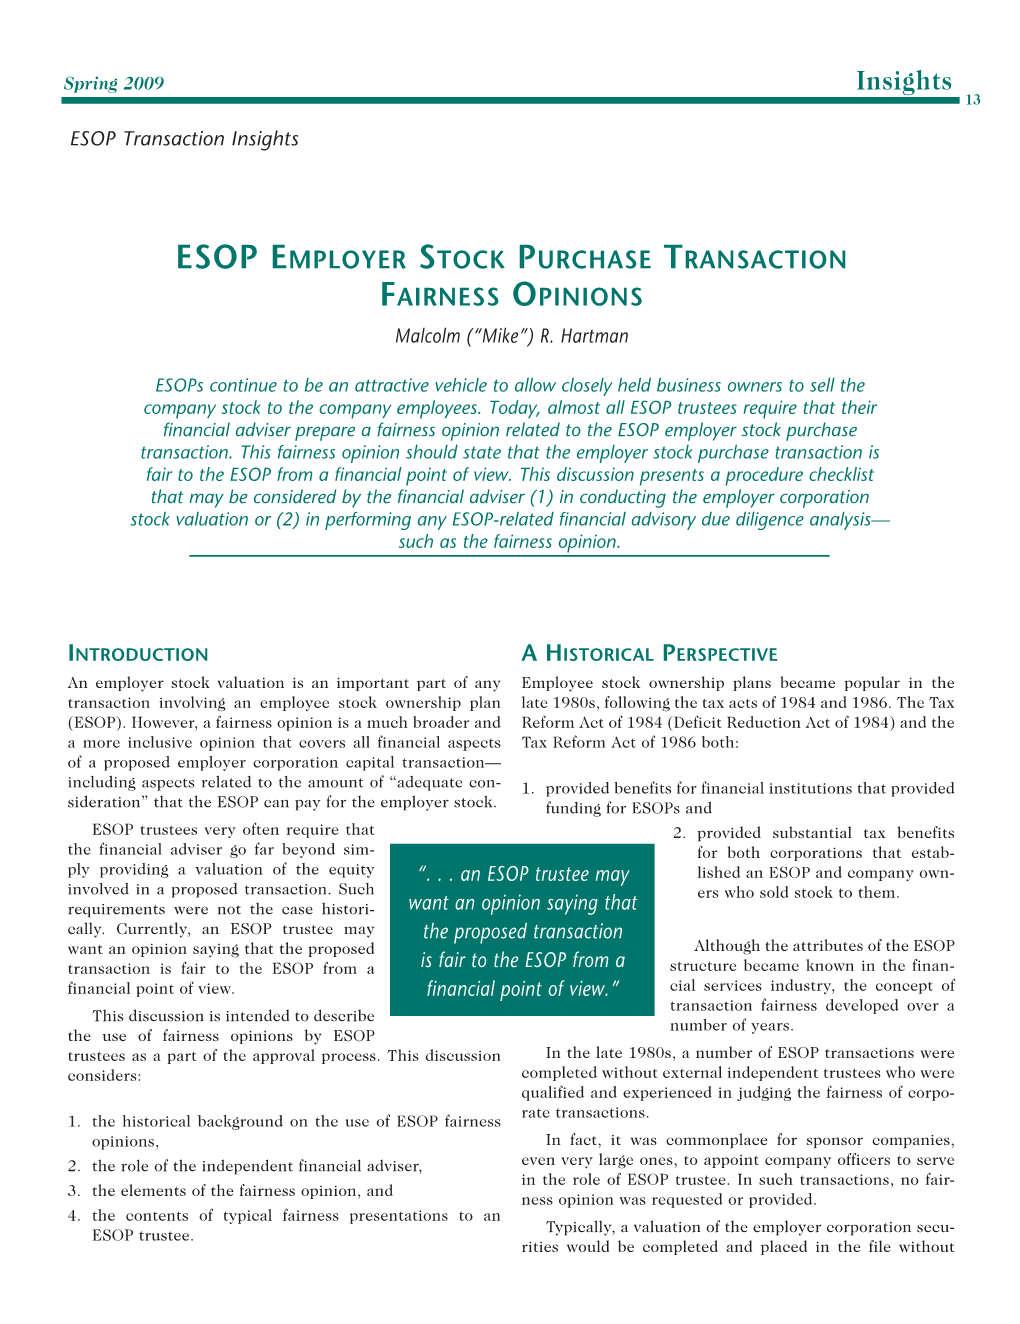 ESOP Employer Stock Purchase Transaction Fairness Opinions Malcolm (“Mike”) R